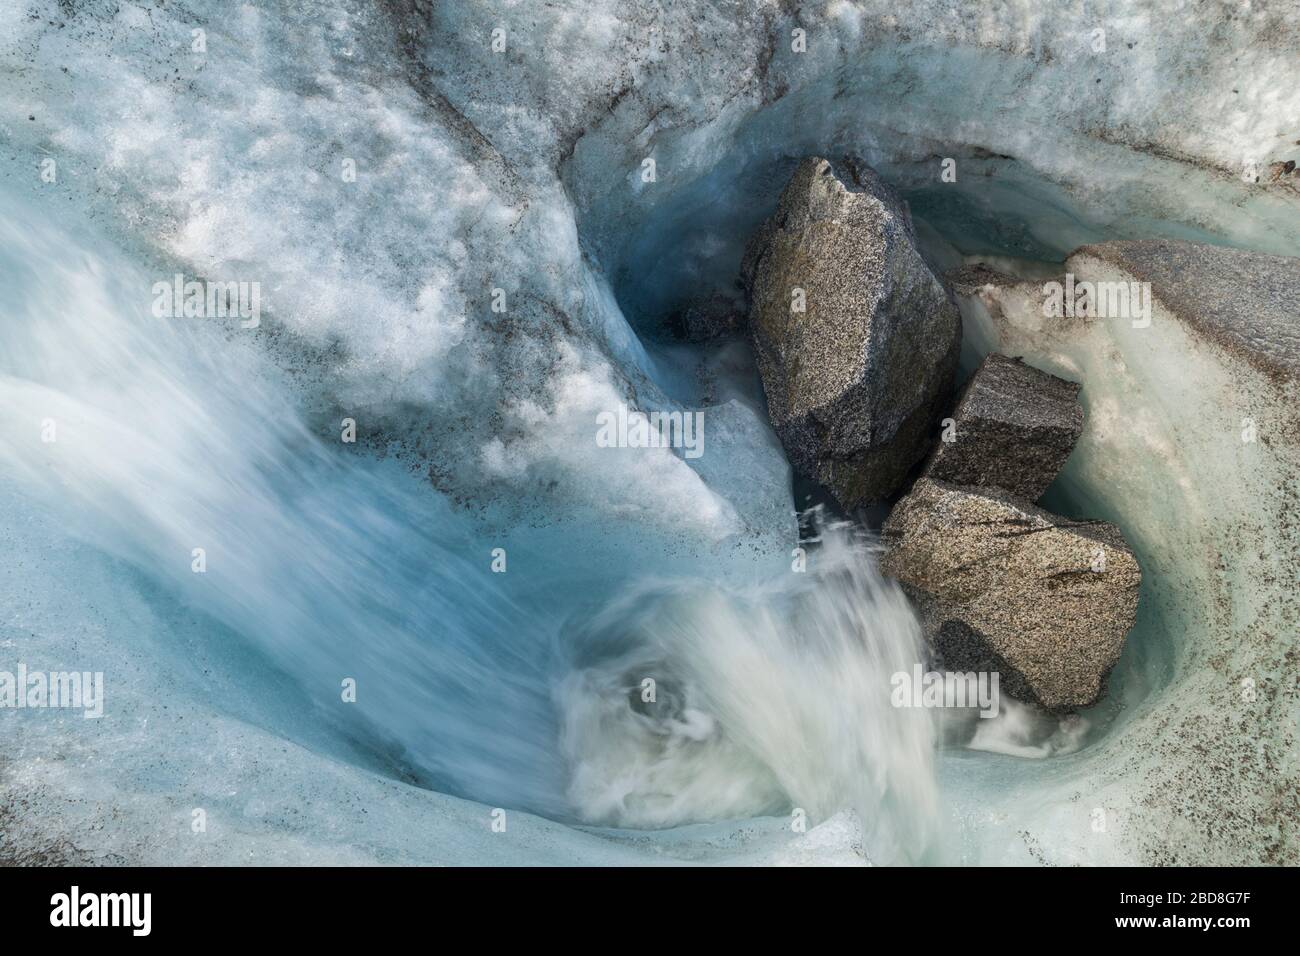 Glacial meltwater stream with boulders deposited by rockfall on the surface of Snowbird Glacier, Talkeetna Mountains, Alaska. Stock Photo